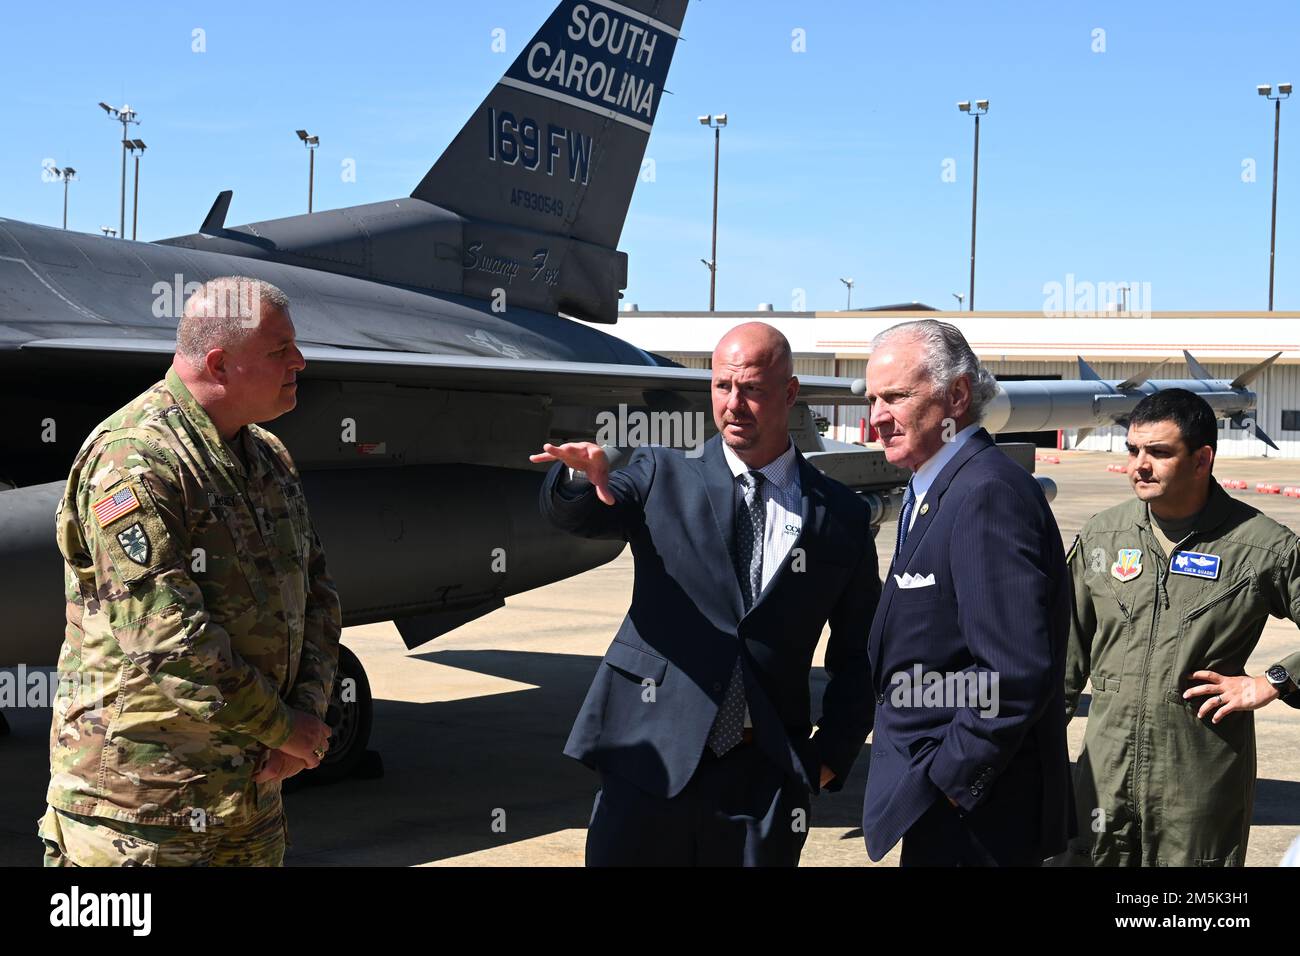 South Carolina Governor Henry McMaster, center-right, speaks with Mike Gula, center-left, Executive Director at Columbia Metropolitan Airport, with U.S. Army Maj. Gen. Van McCarty, left, The Adjutant General of South Carolina, and U.S. Air Force Col. Quaid Quadri, far right, 169th Fighter Wing Commander, in front of the South Carolina Air National Guard's flagship F-16 fighter jet at Columbia Metropolitan Airport, March 21, 2022. Columbia Metropolitan Airport hosts a press conference to announce a six-month temporary move of F-16 fighter jet flying operations from the the South Carolina Air Na Stock Photo